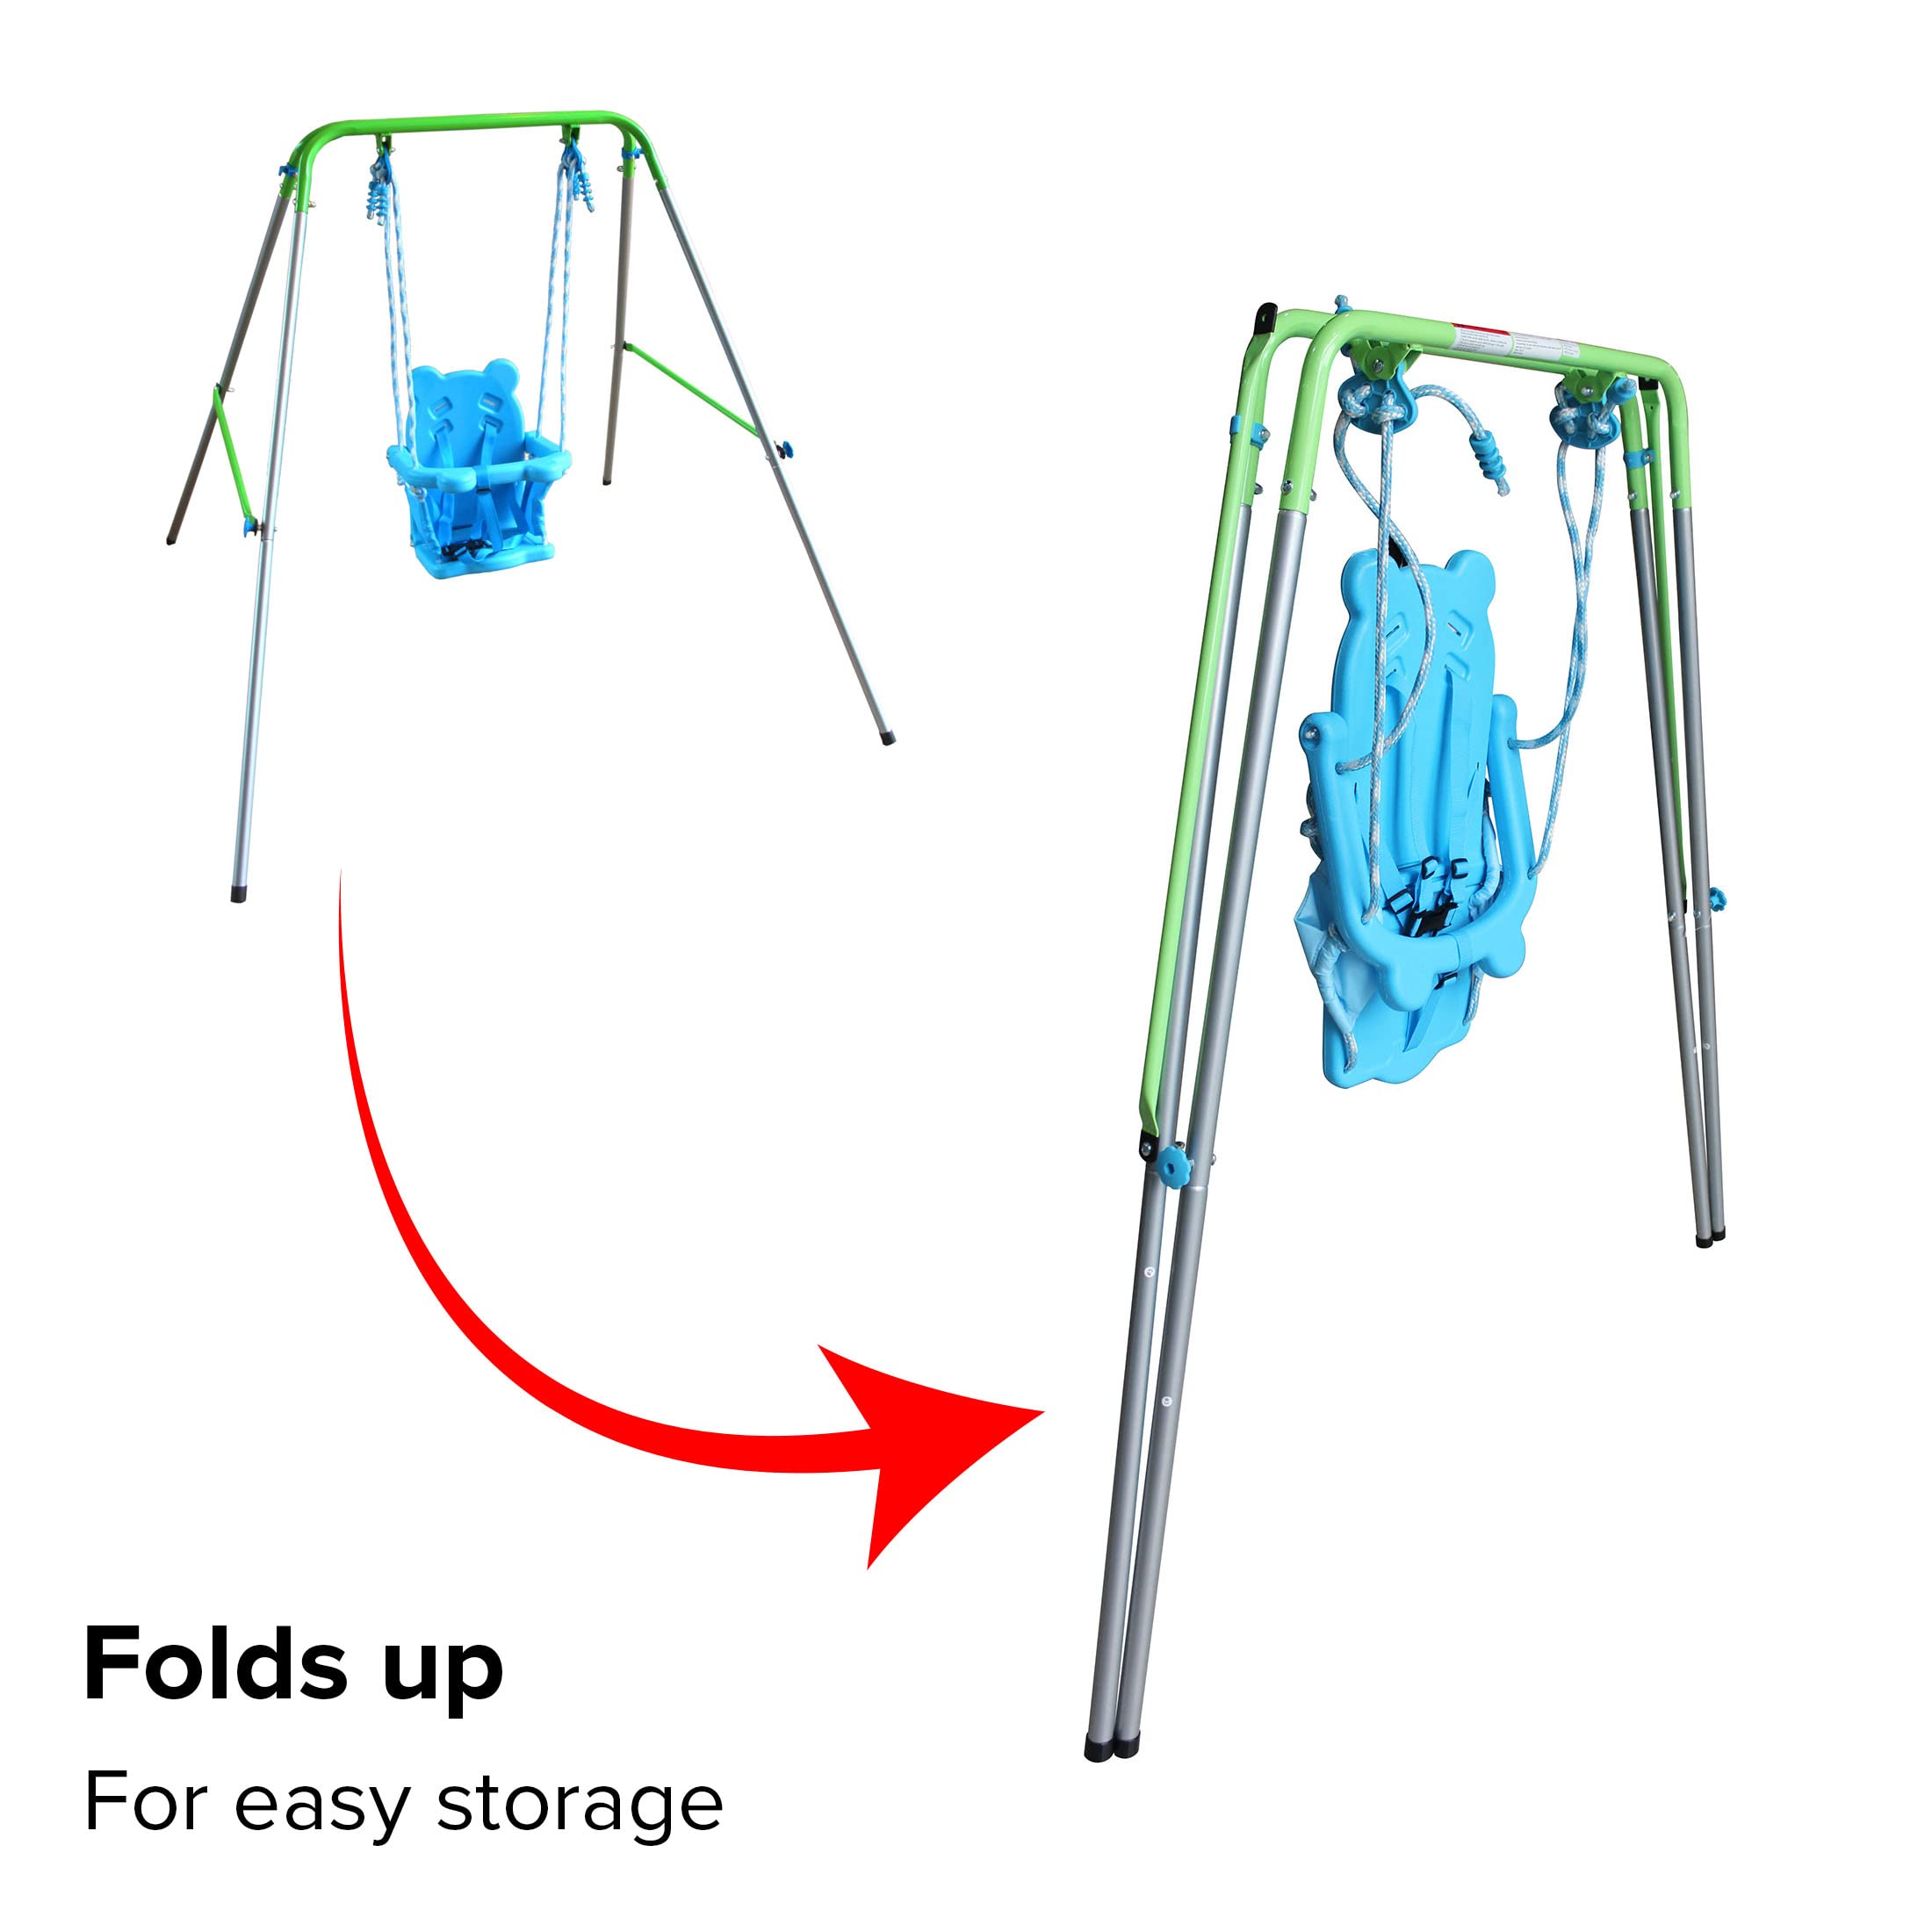 Sportspower My First Toddler Swing - Heavy-Duty Baby Indoor/Outdoor Swing Set with Safety Harness Blue